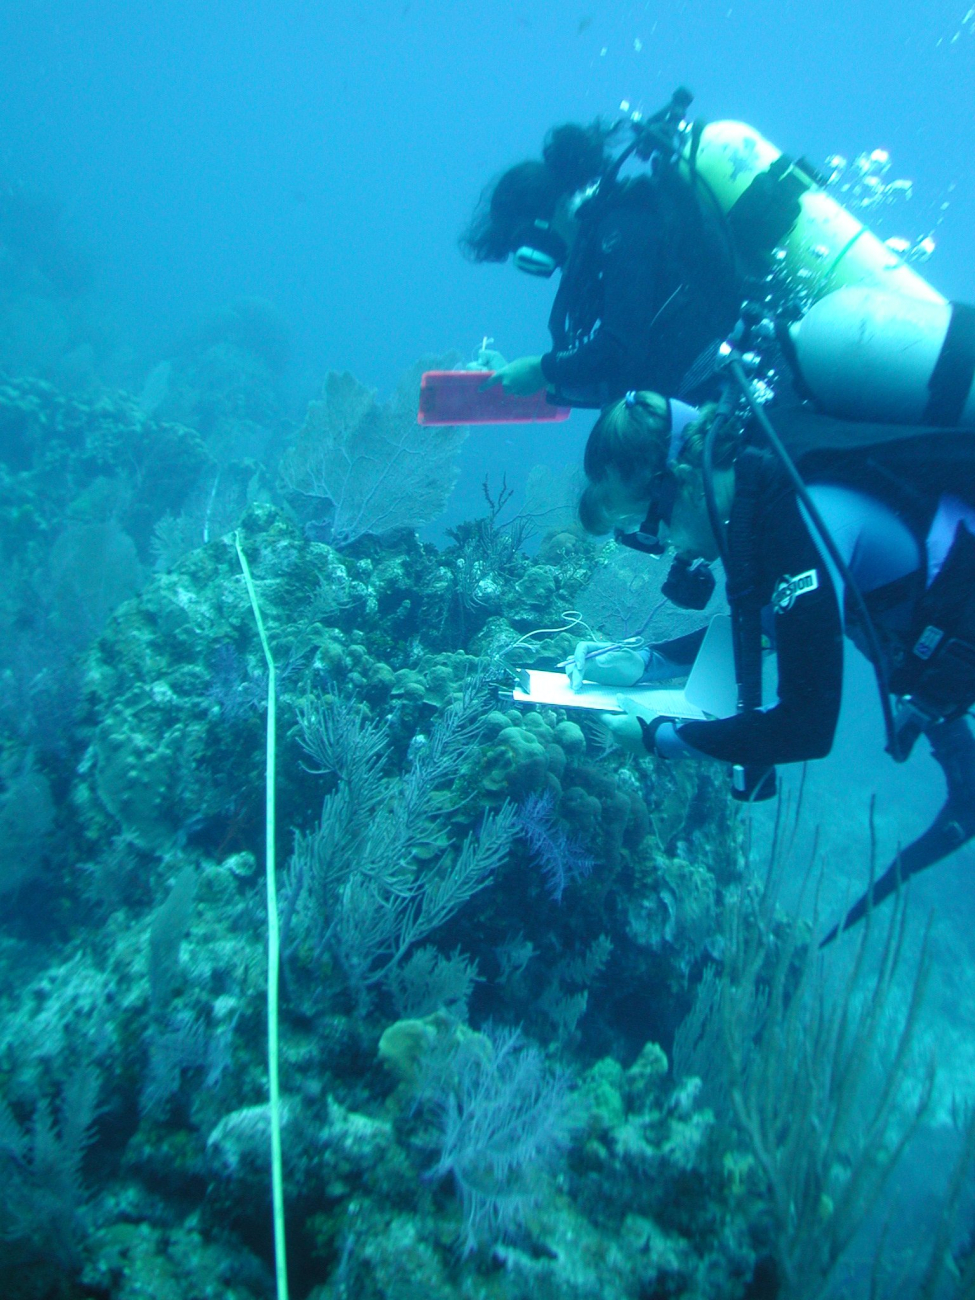 Team TZ members conducting a site survey at a depth of 40 feet